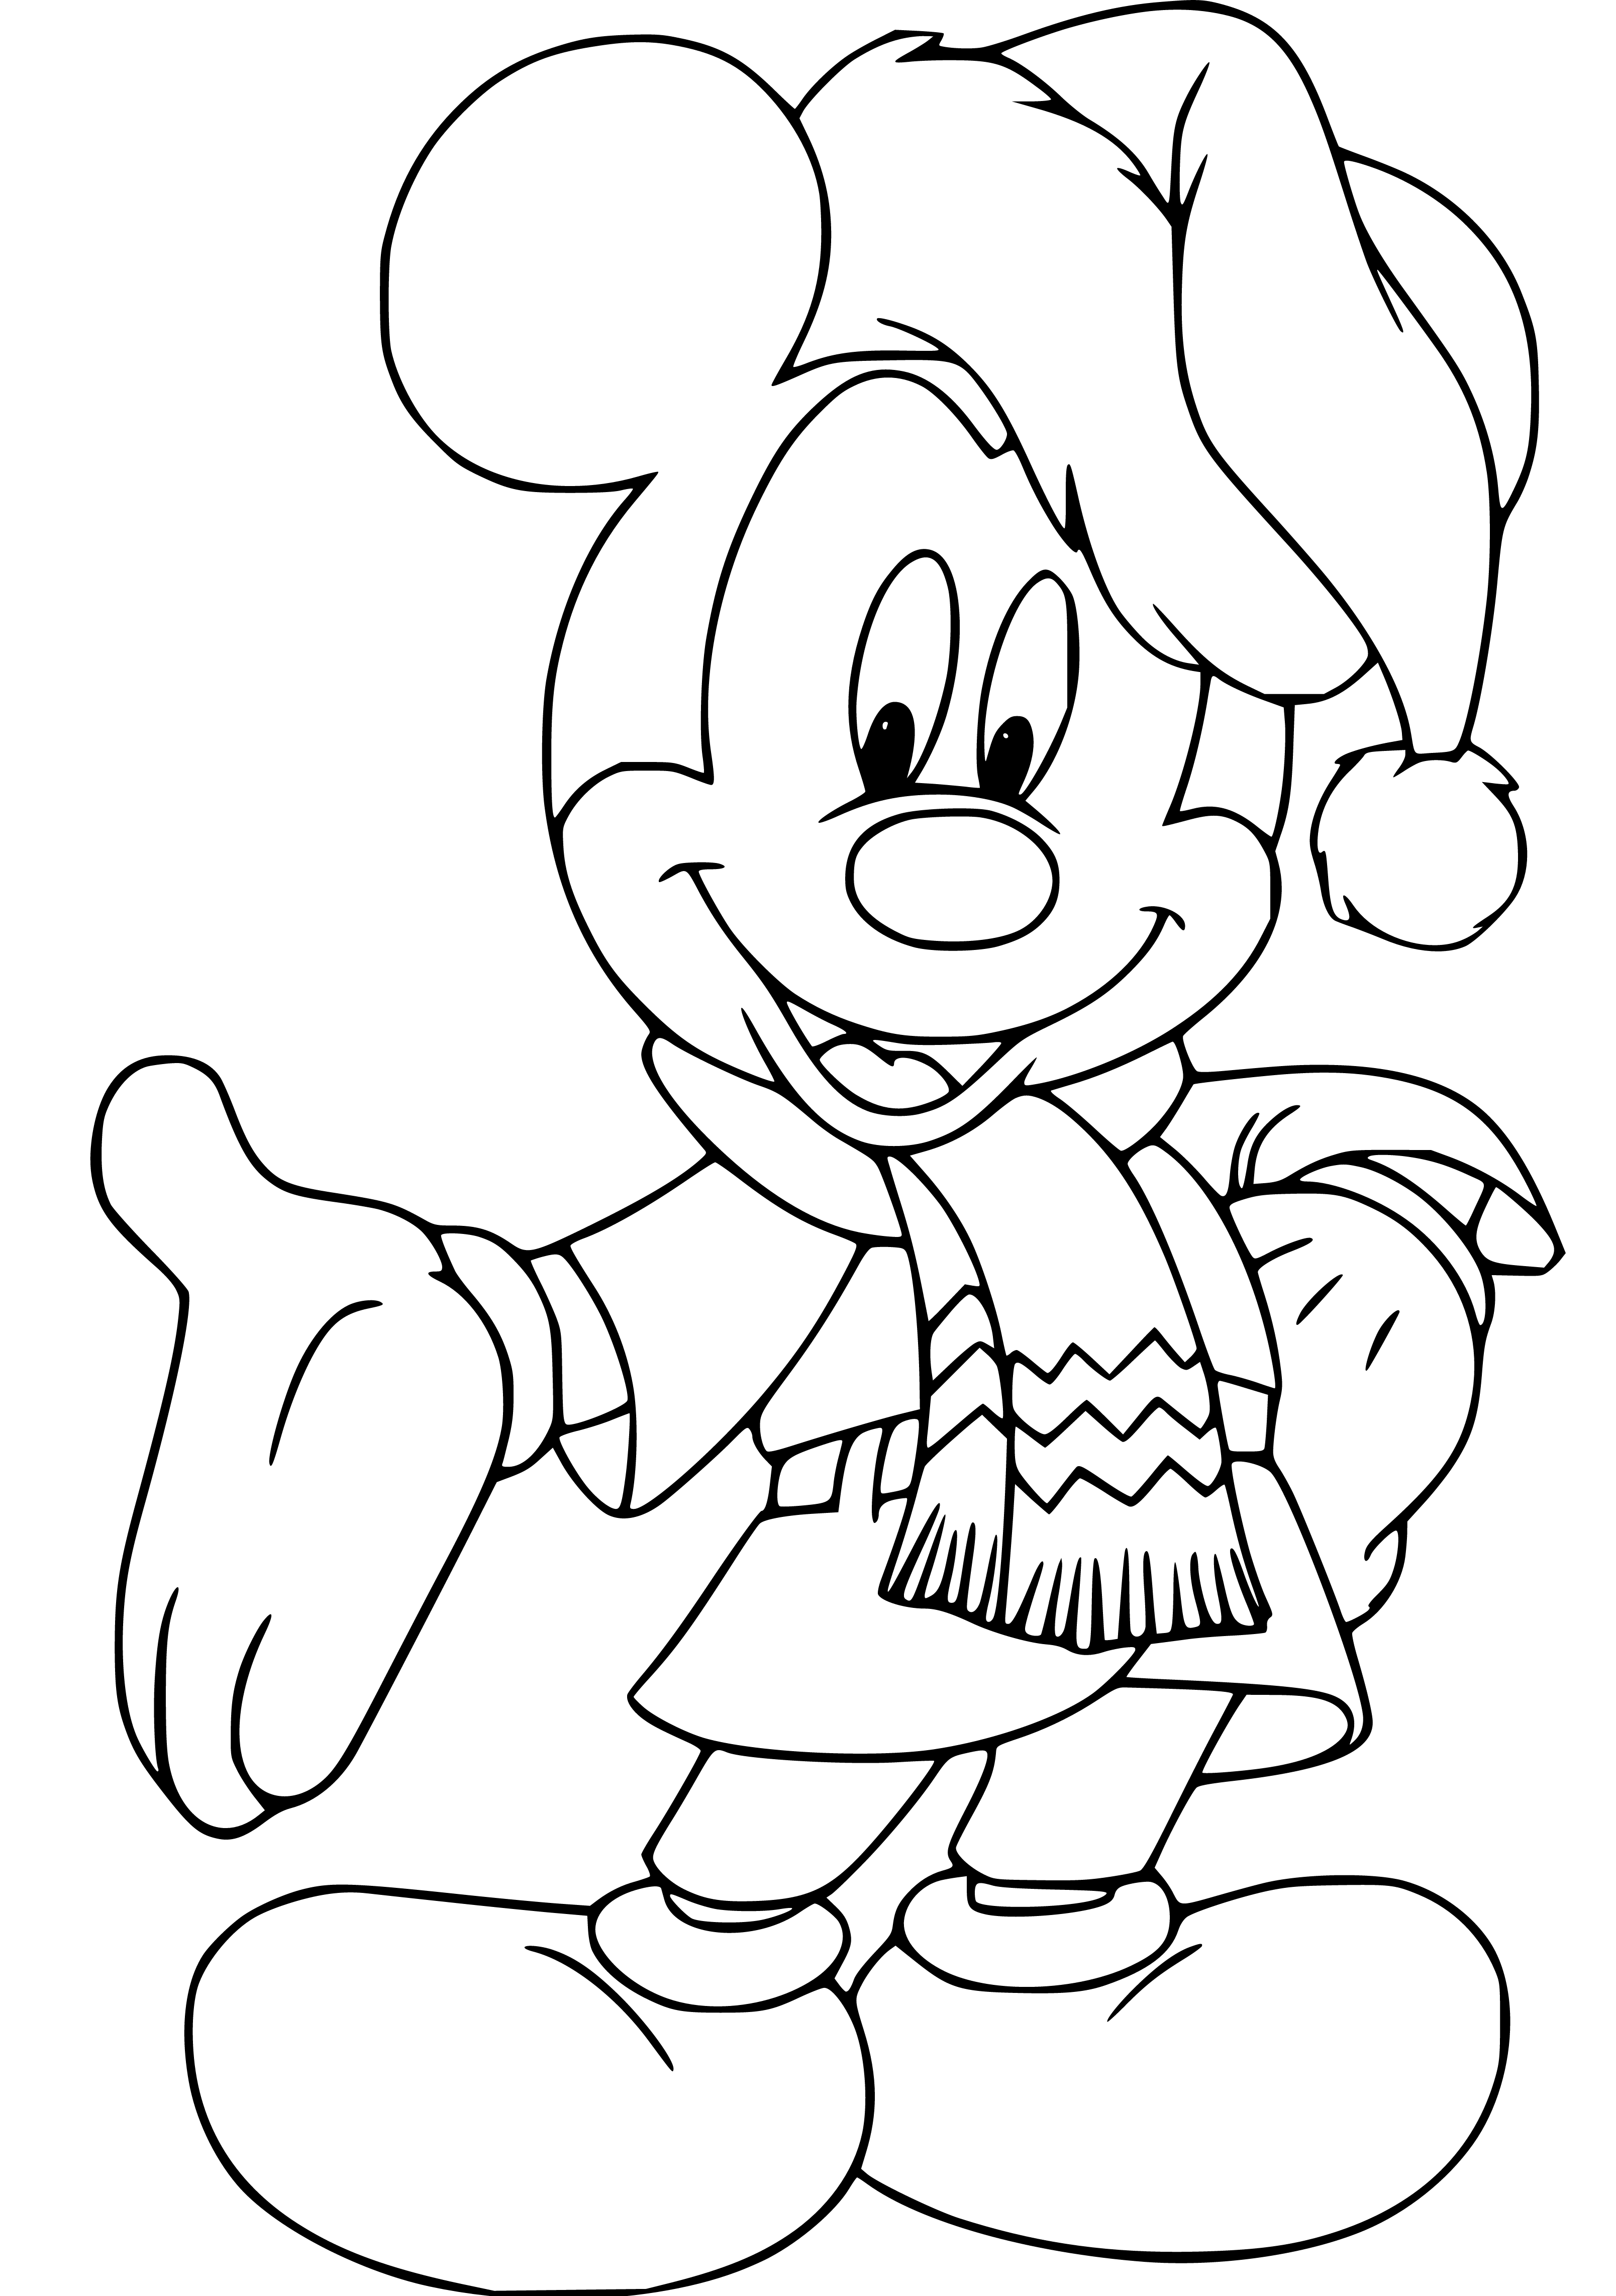 Printable Mickey Mouse  (BW) Coloring Page for kids.